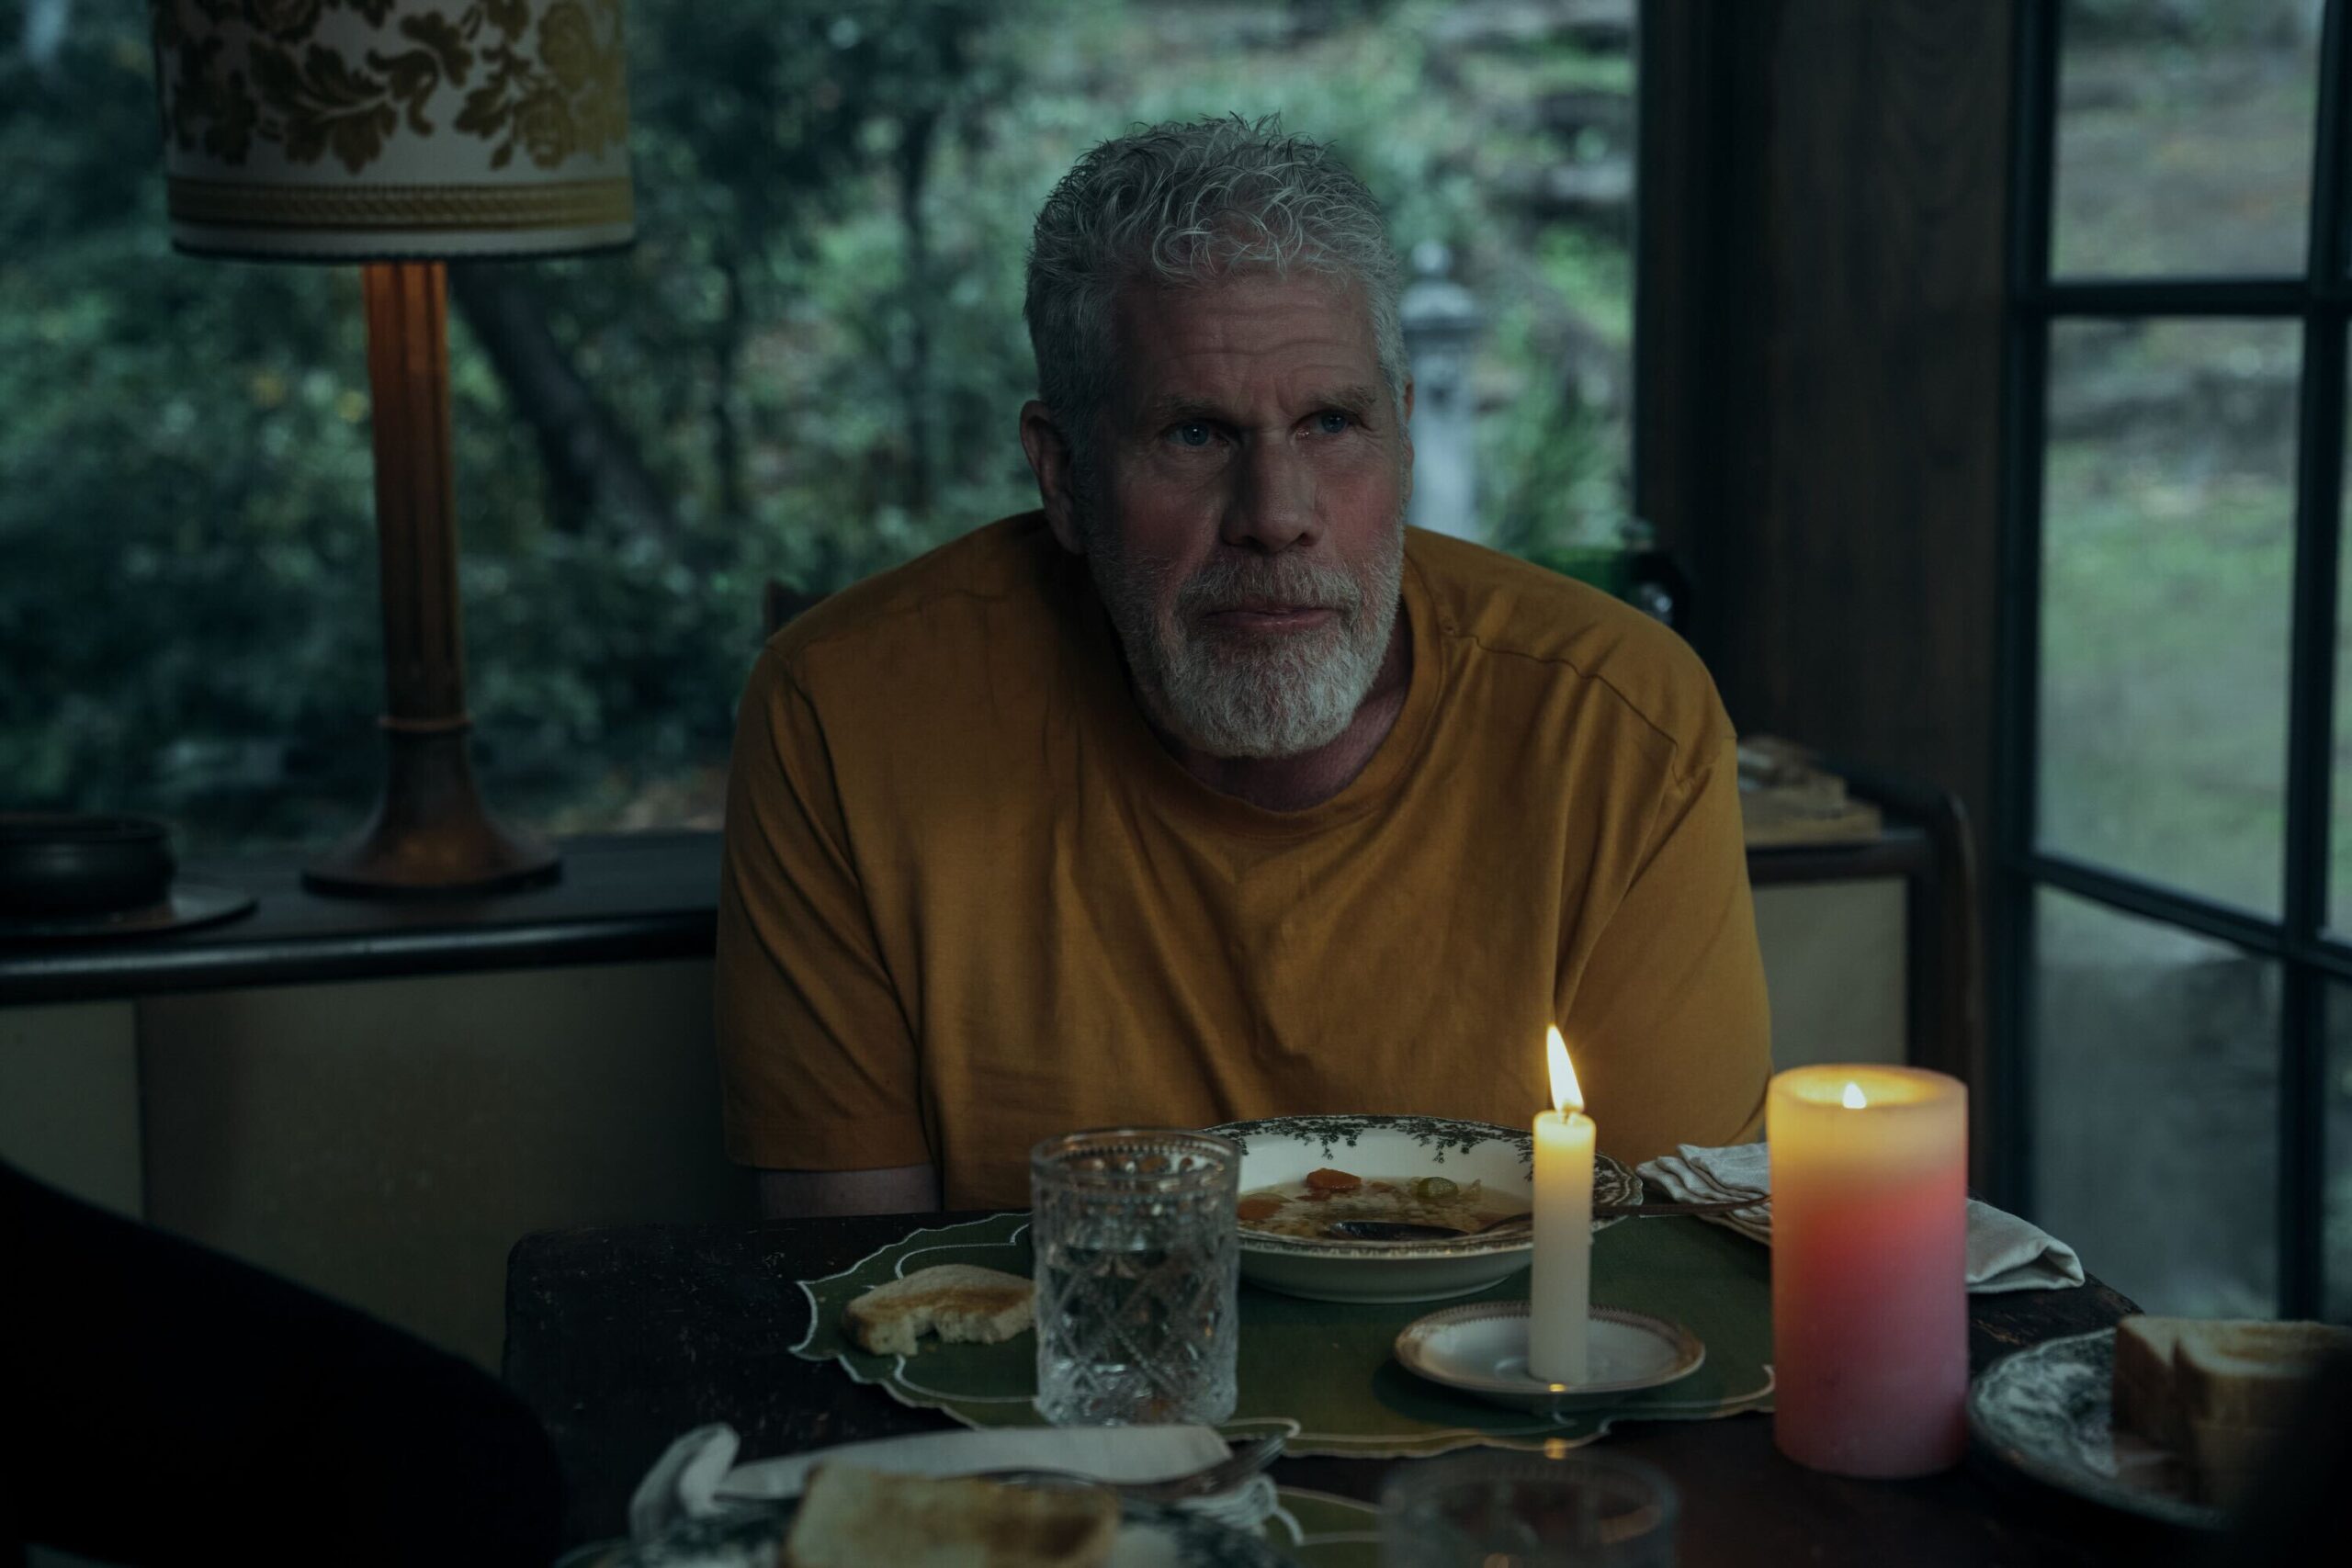 Ron Perlman in Donald Glover and Francesca Sloane's action comedy drama spy thriller adaptation series, Mr and Mrs Smith Season 1 Episode 5